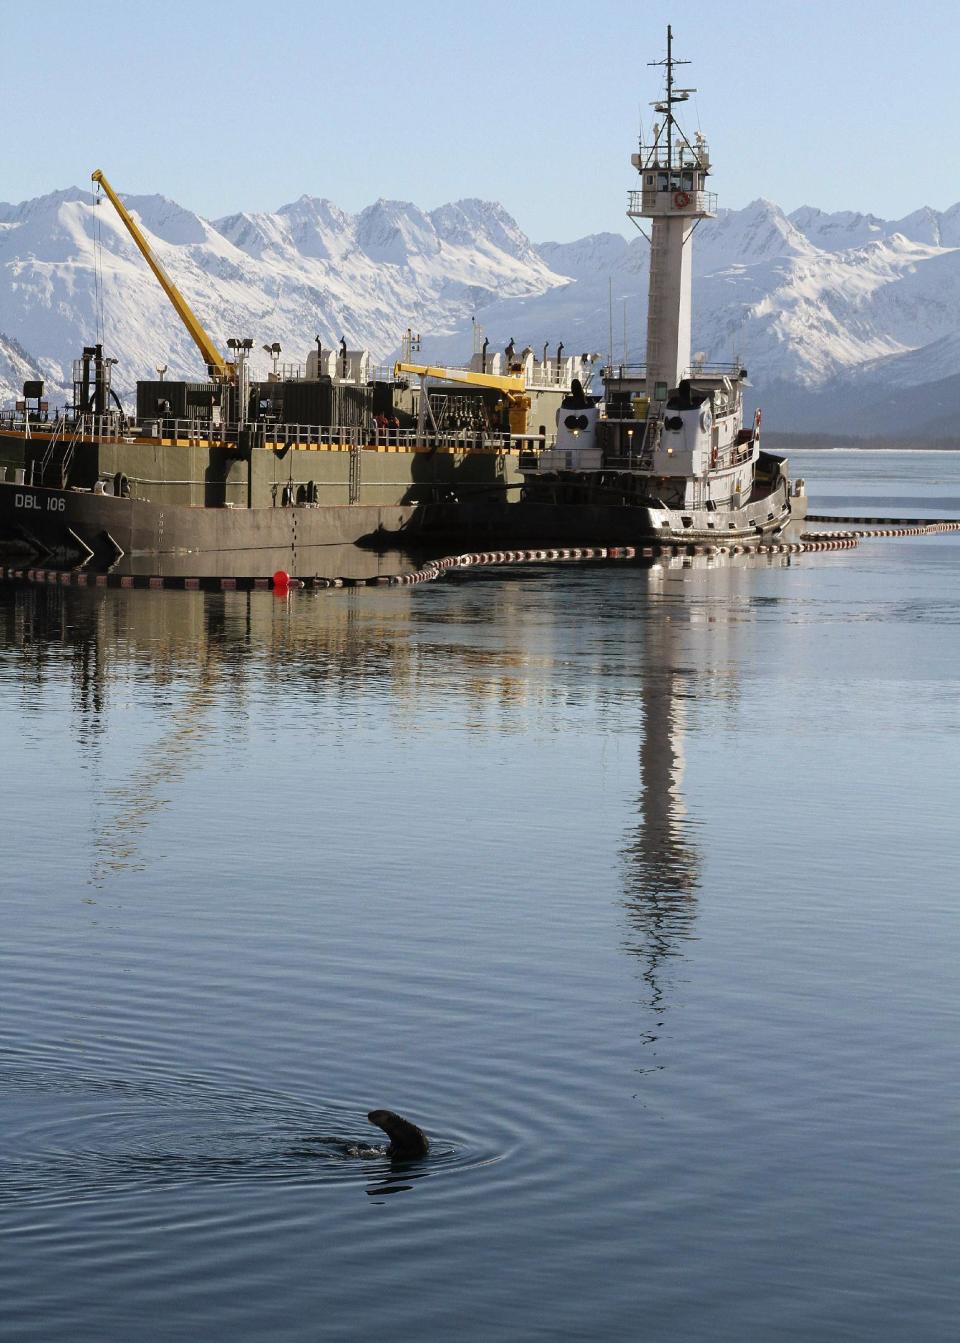 This photo taken Thursday, Feb. 27, 2014, in Valdez, Alaska, shows a sea otter in the bay near the ferry dock. The U.S. Geological Survey report released Friday, Feb. 28, 2014, concludes sea otters in Alaska's Prince William Sound have recovered to levels seen before the Exxon Valdez oil spill nearly 25 years ago. (AP Photo/Mark Thiessen)